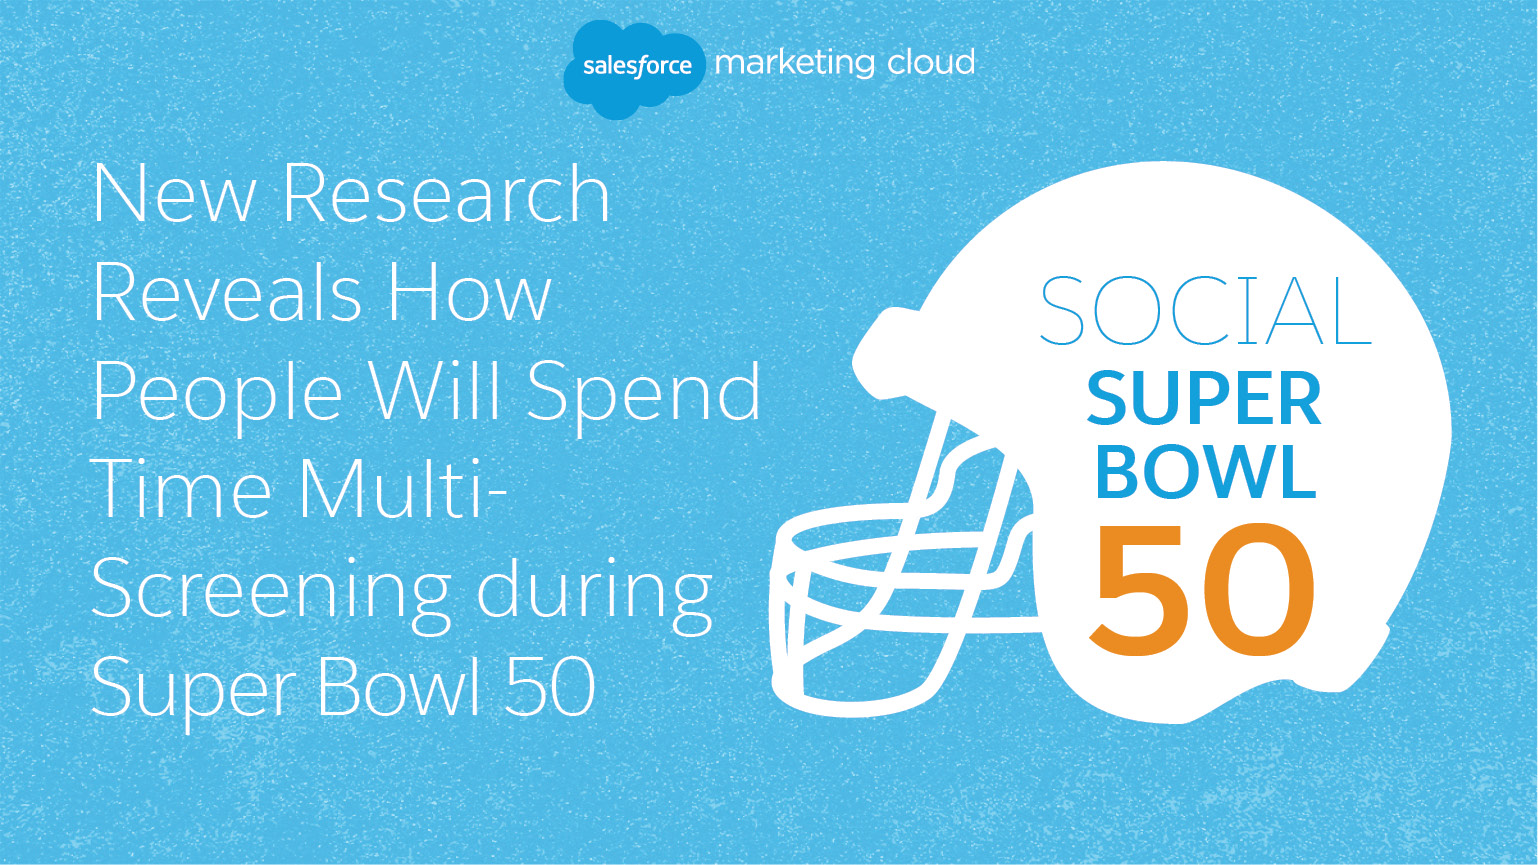 New Research Reveals How People Will Spend Time Multi-Screening During Super Bowl 50